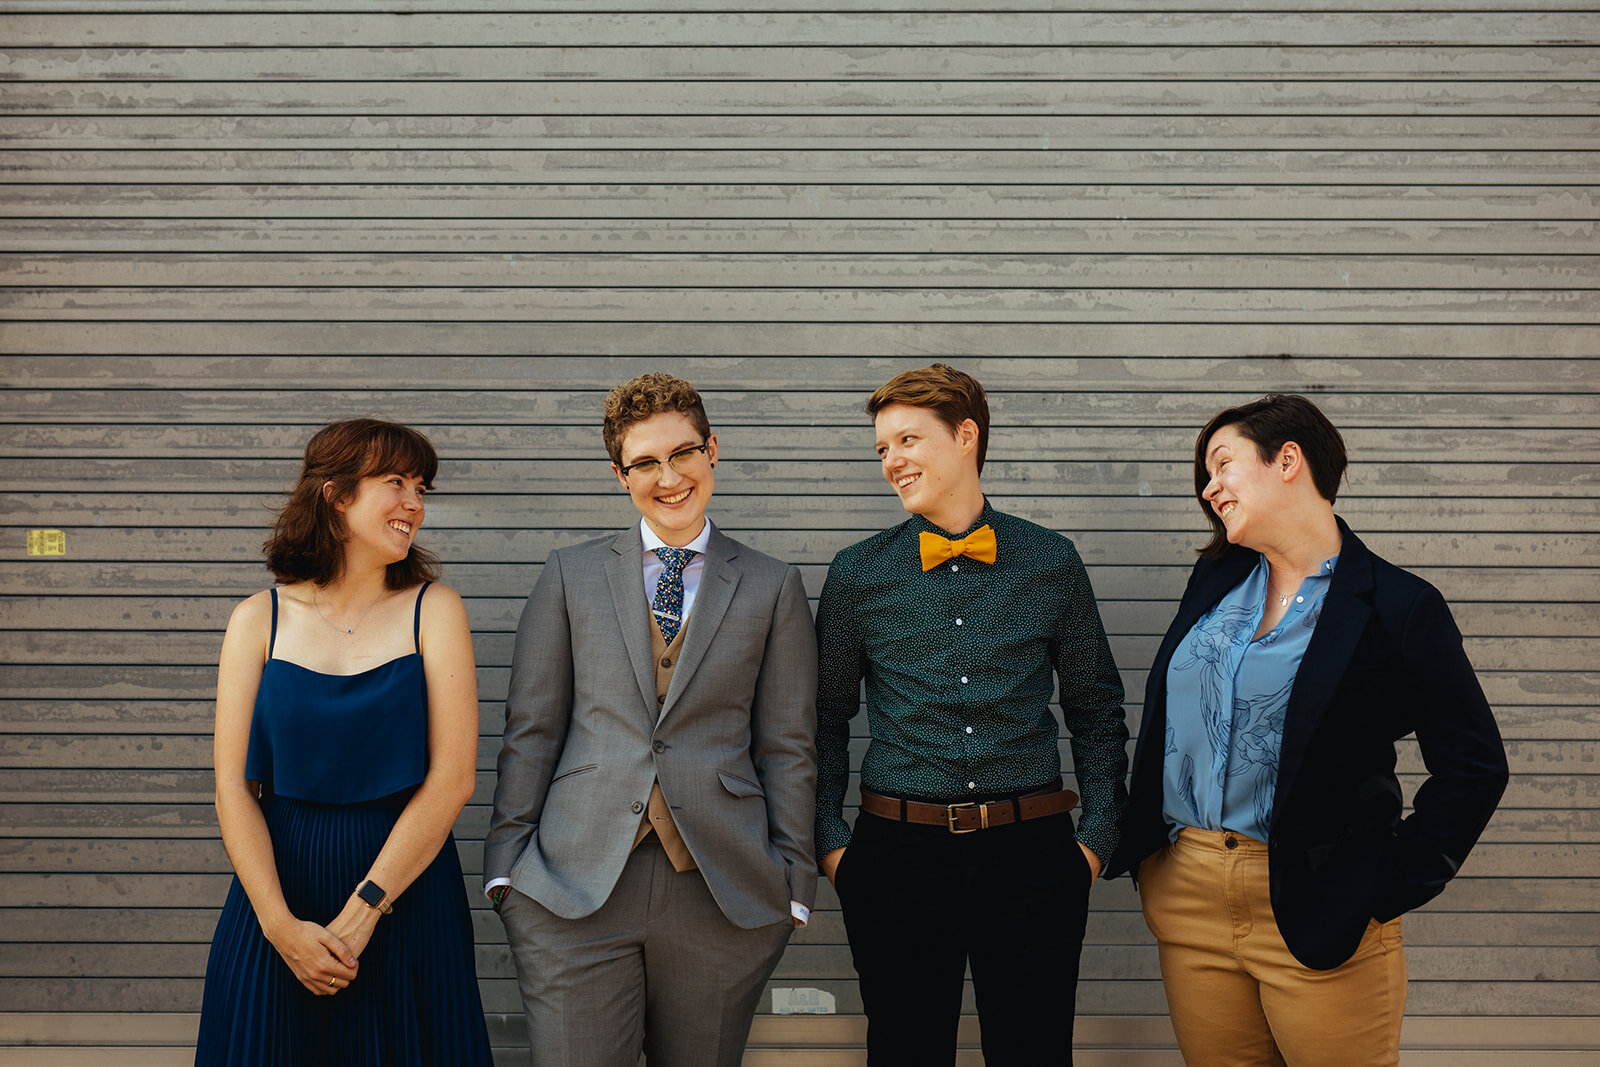 Queer future spouse posing with their wedding party in Brooklyn NYC Shawnee Custalow Queer Wedding Photographer